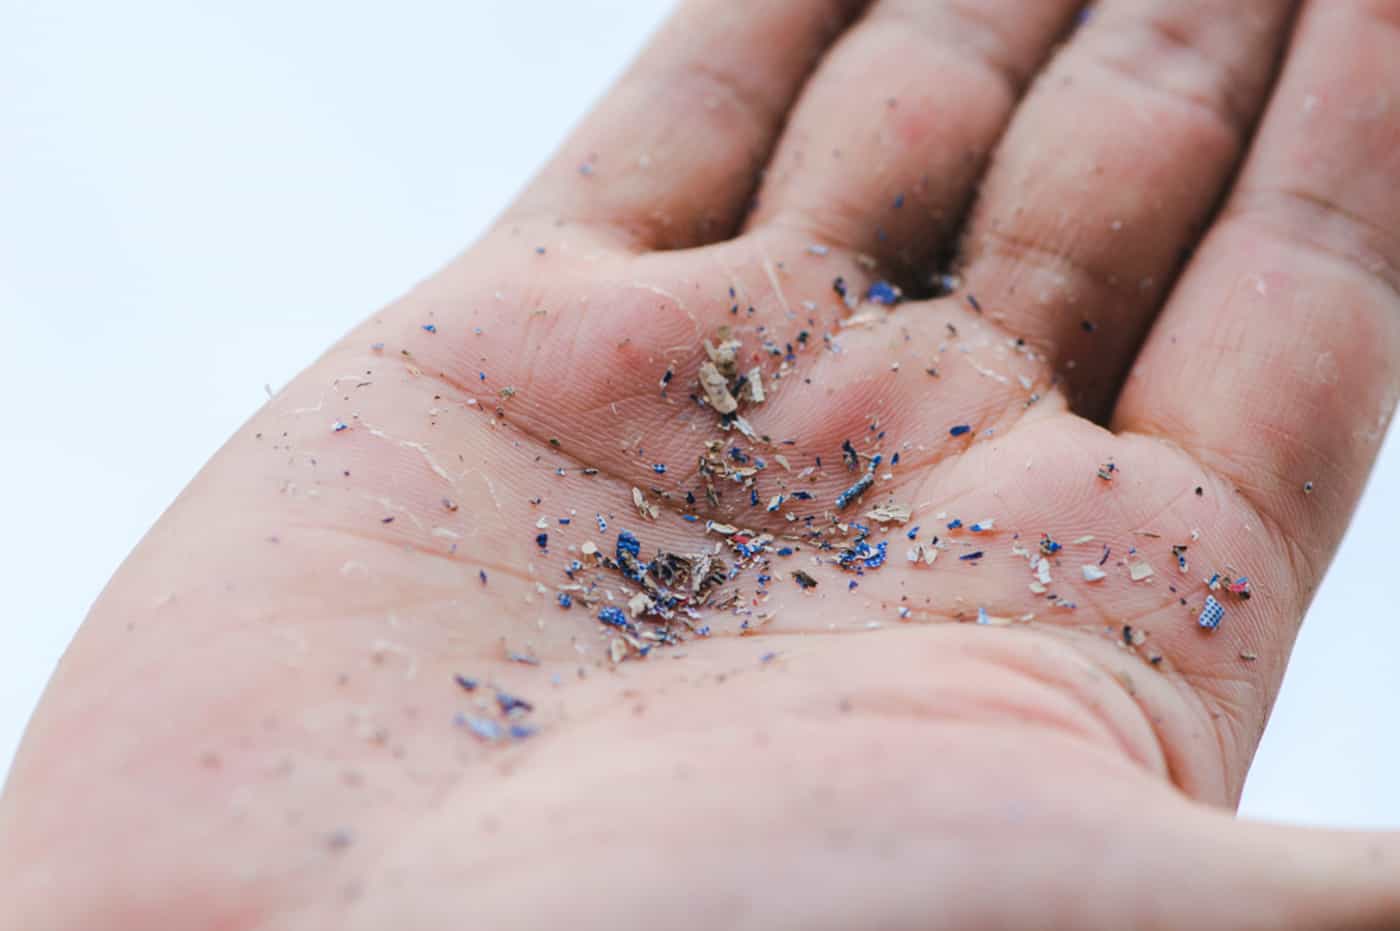 Microplastics may be linked to Parkinson’s disease